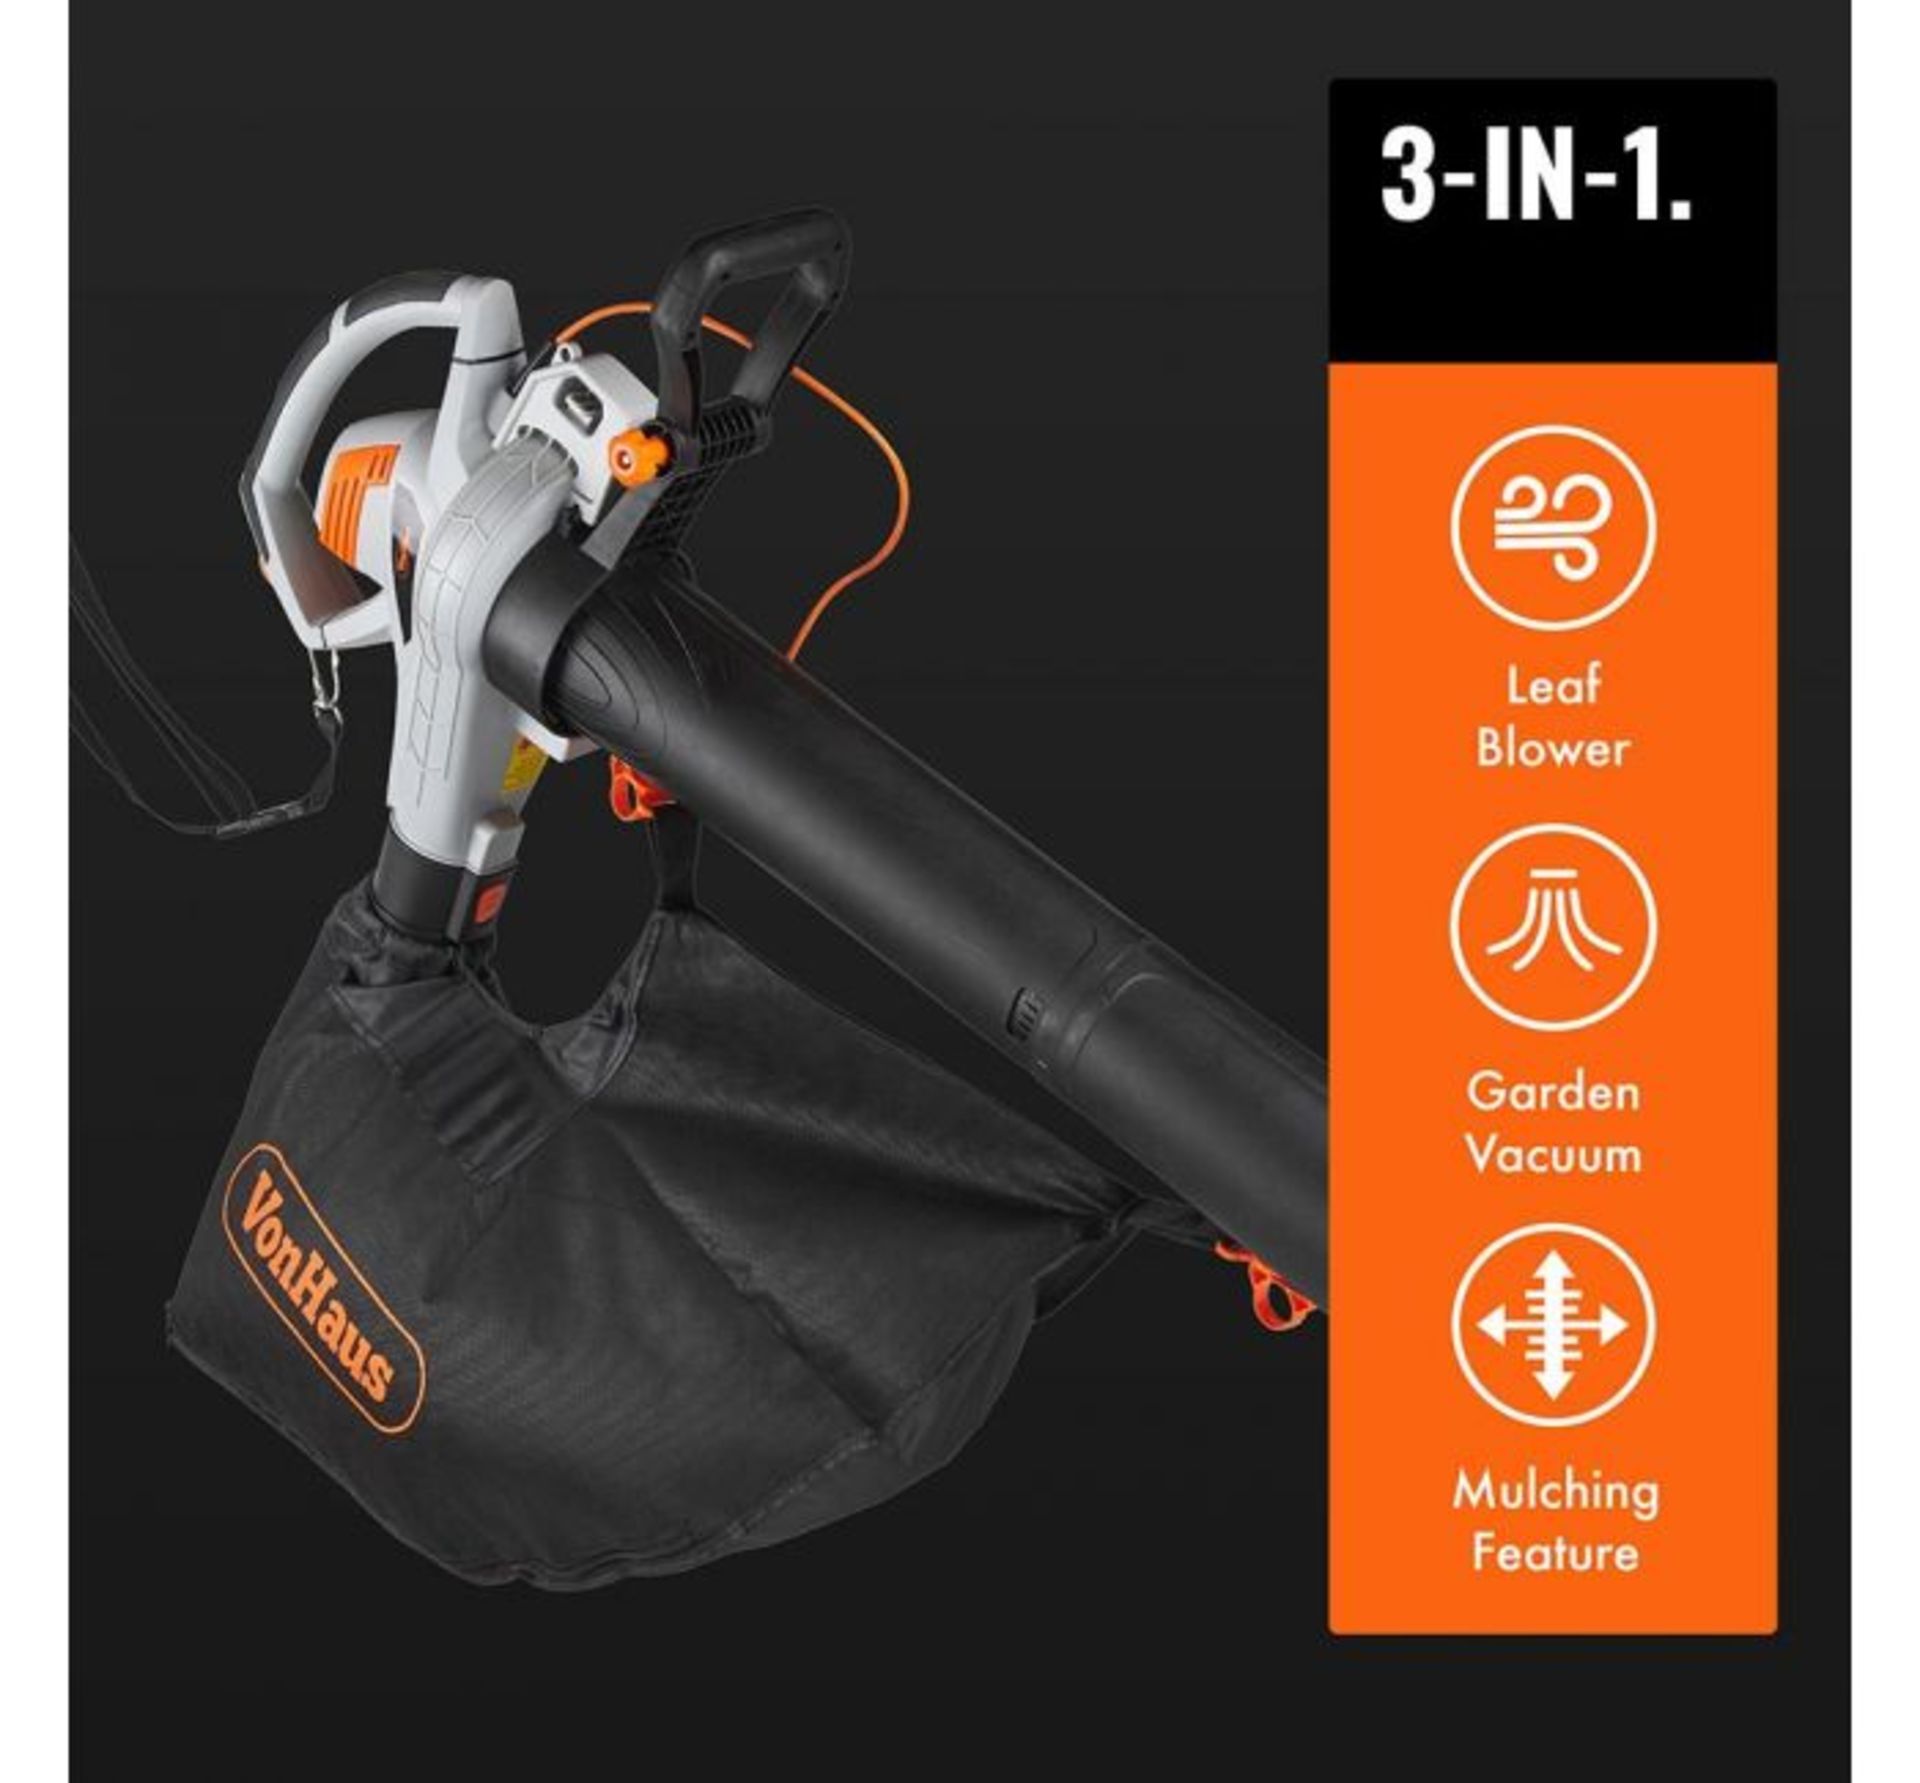 (GE25) 3000W 3-in-1 Leaf Blower Powerful 3000W motor blows, vacuums and mulches leaves into ma... - Image 3 of 5